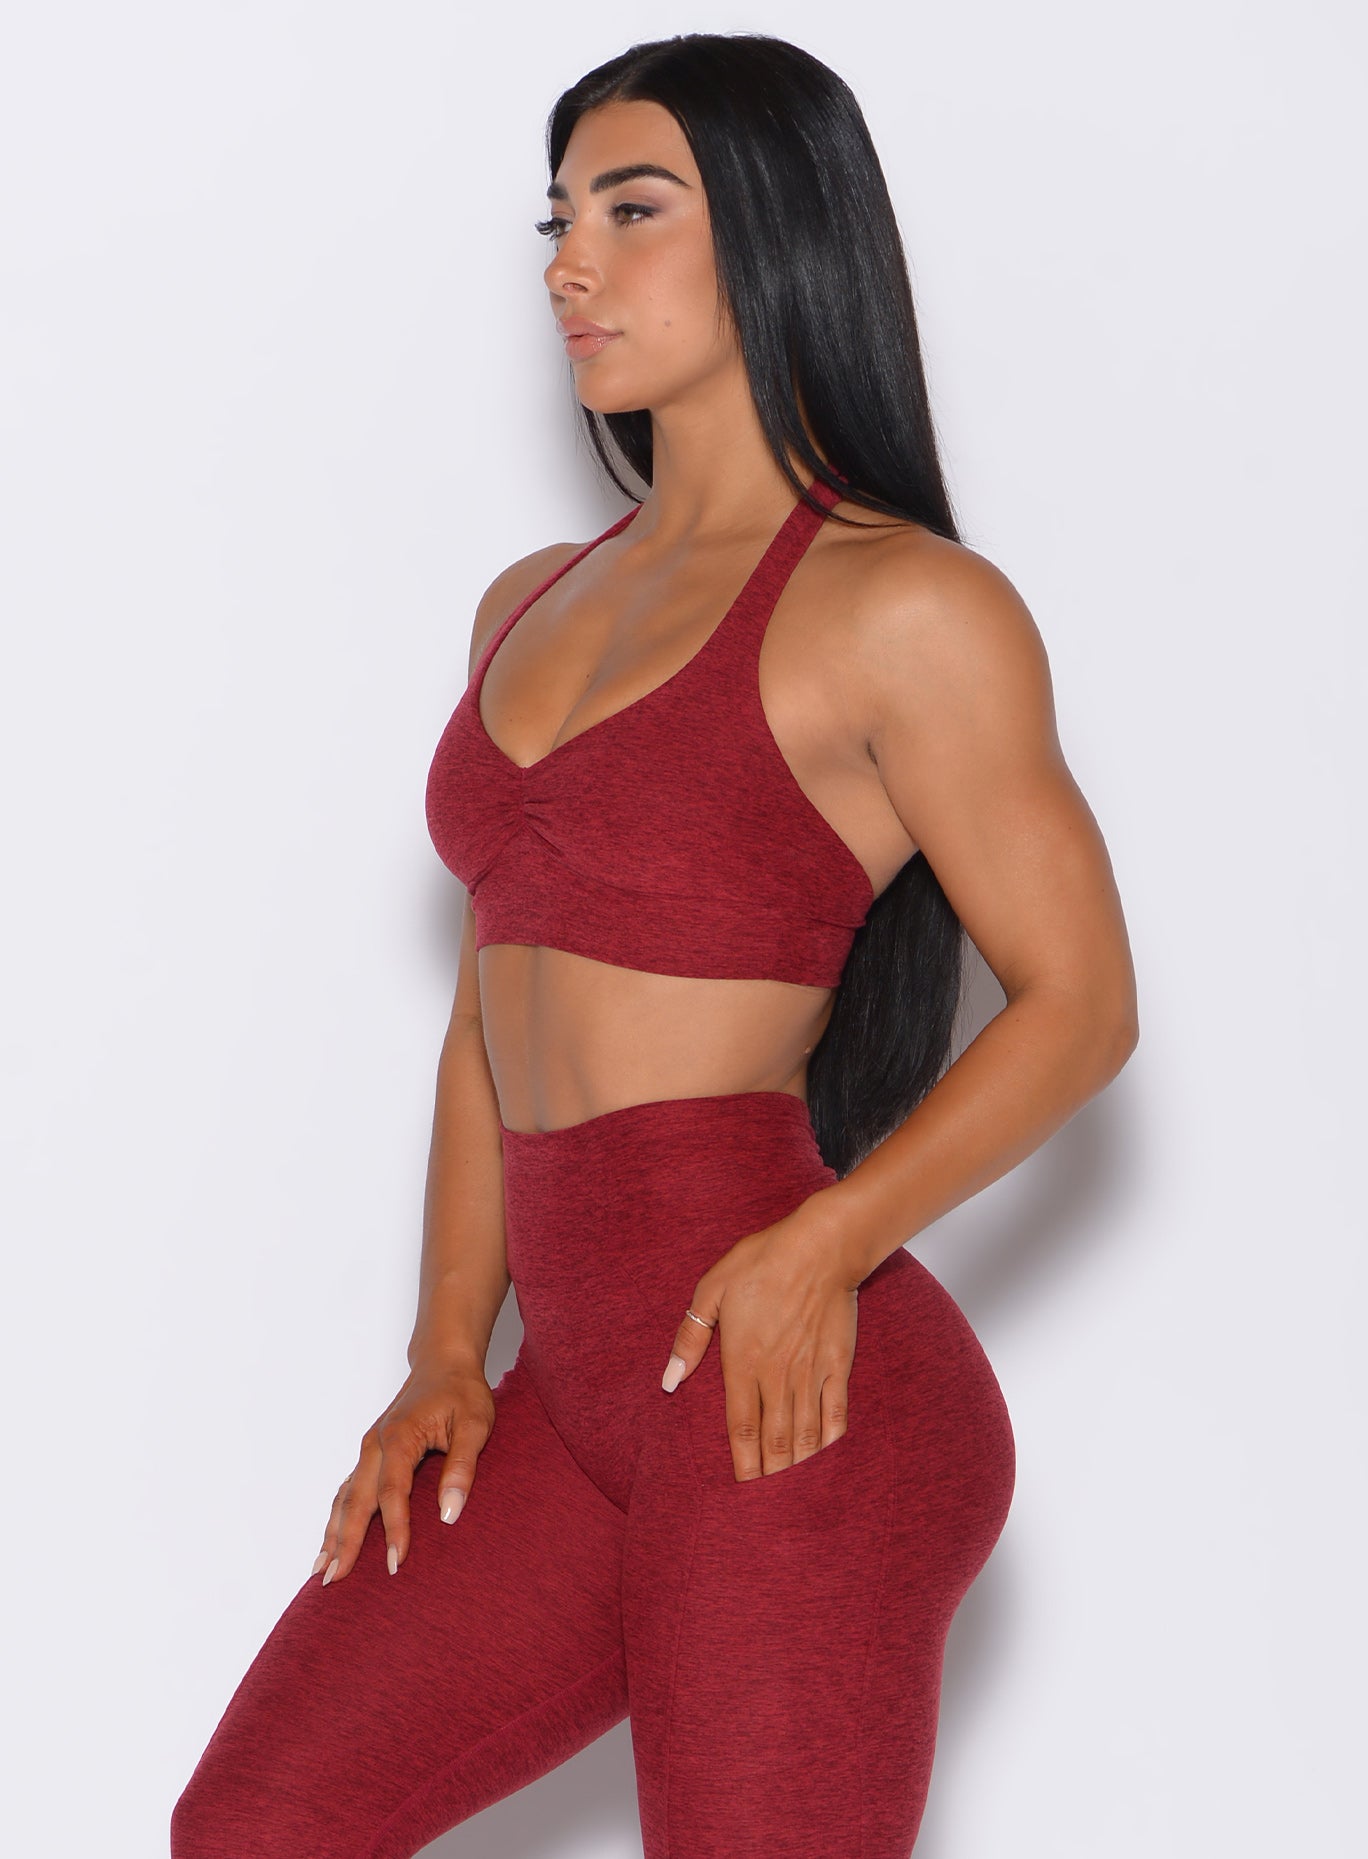 Left side profile view of a model wearing our backless bra in Garnet Red and a matching high waist leggings